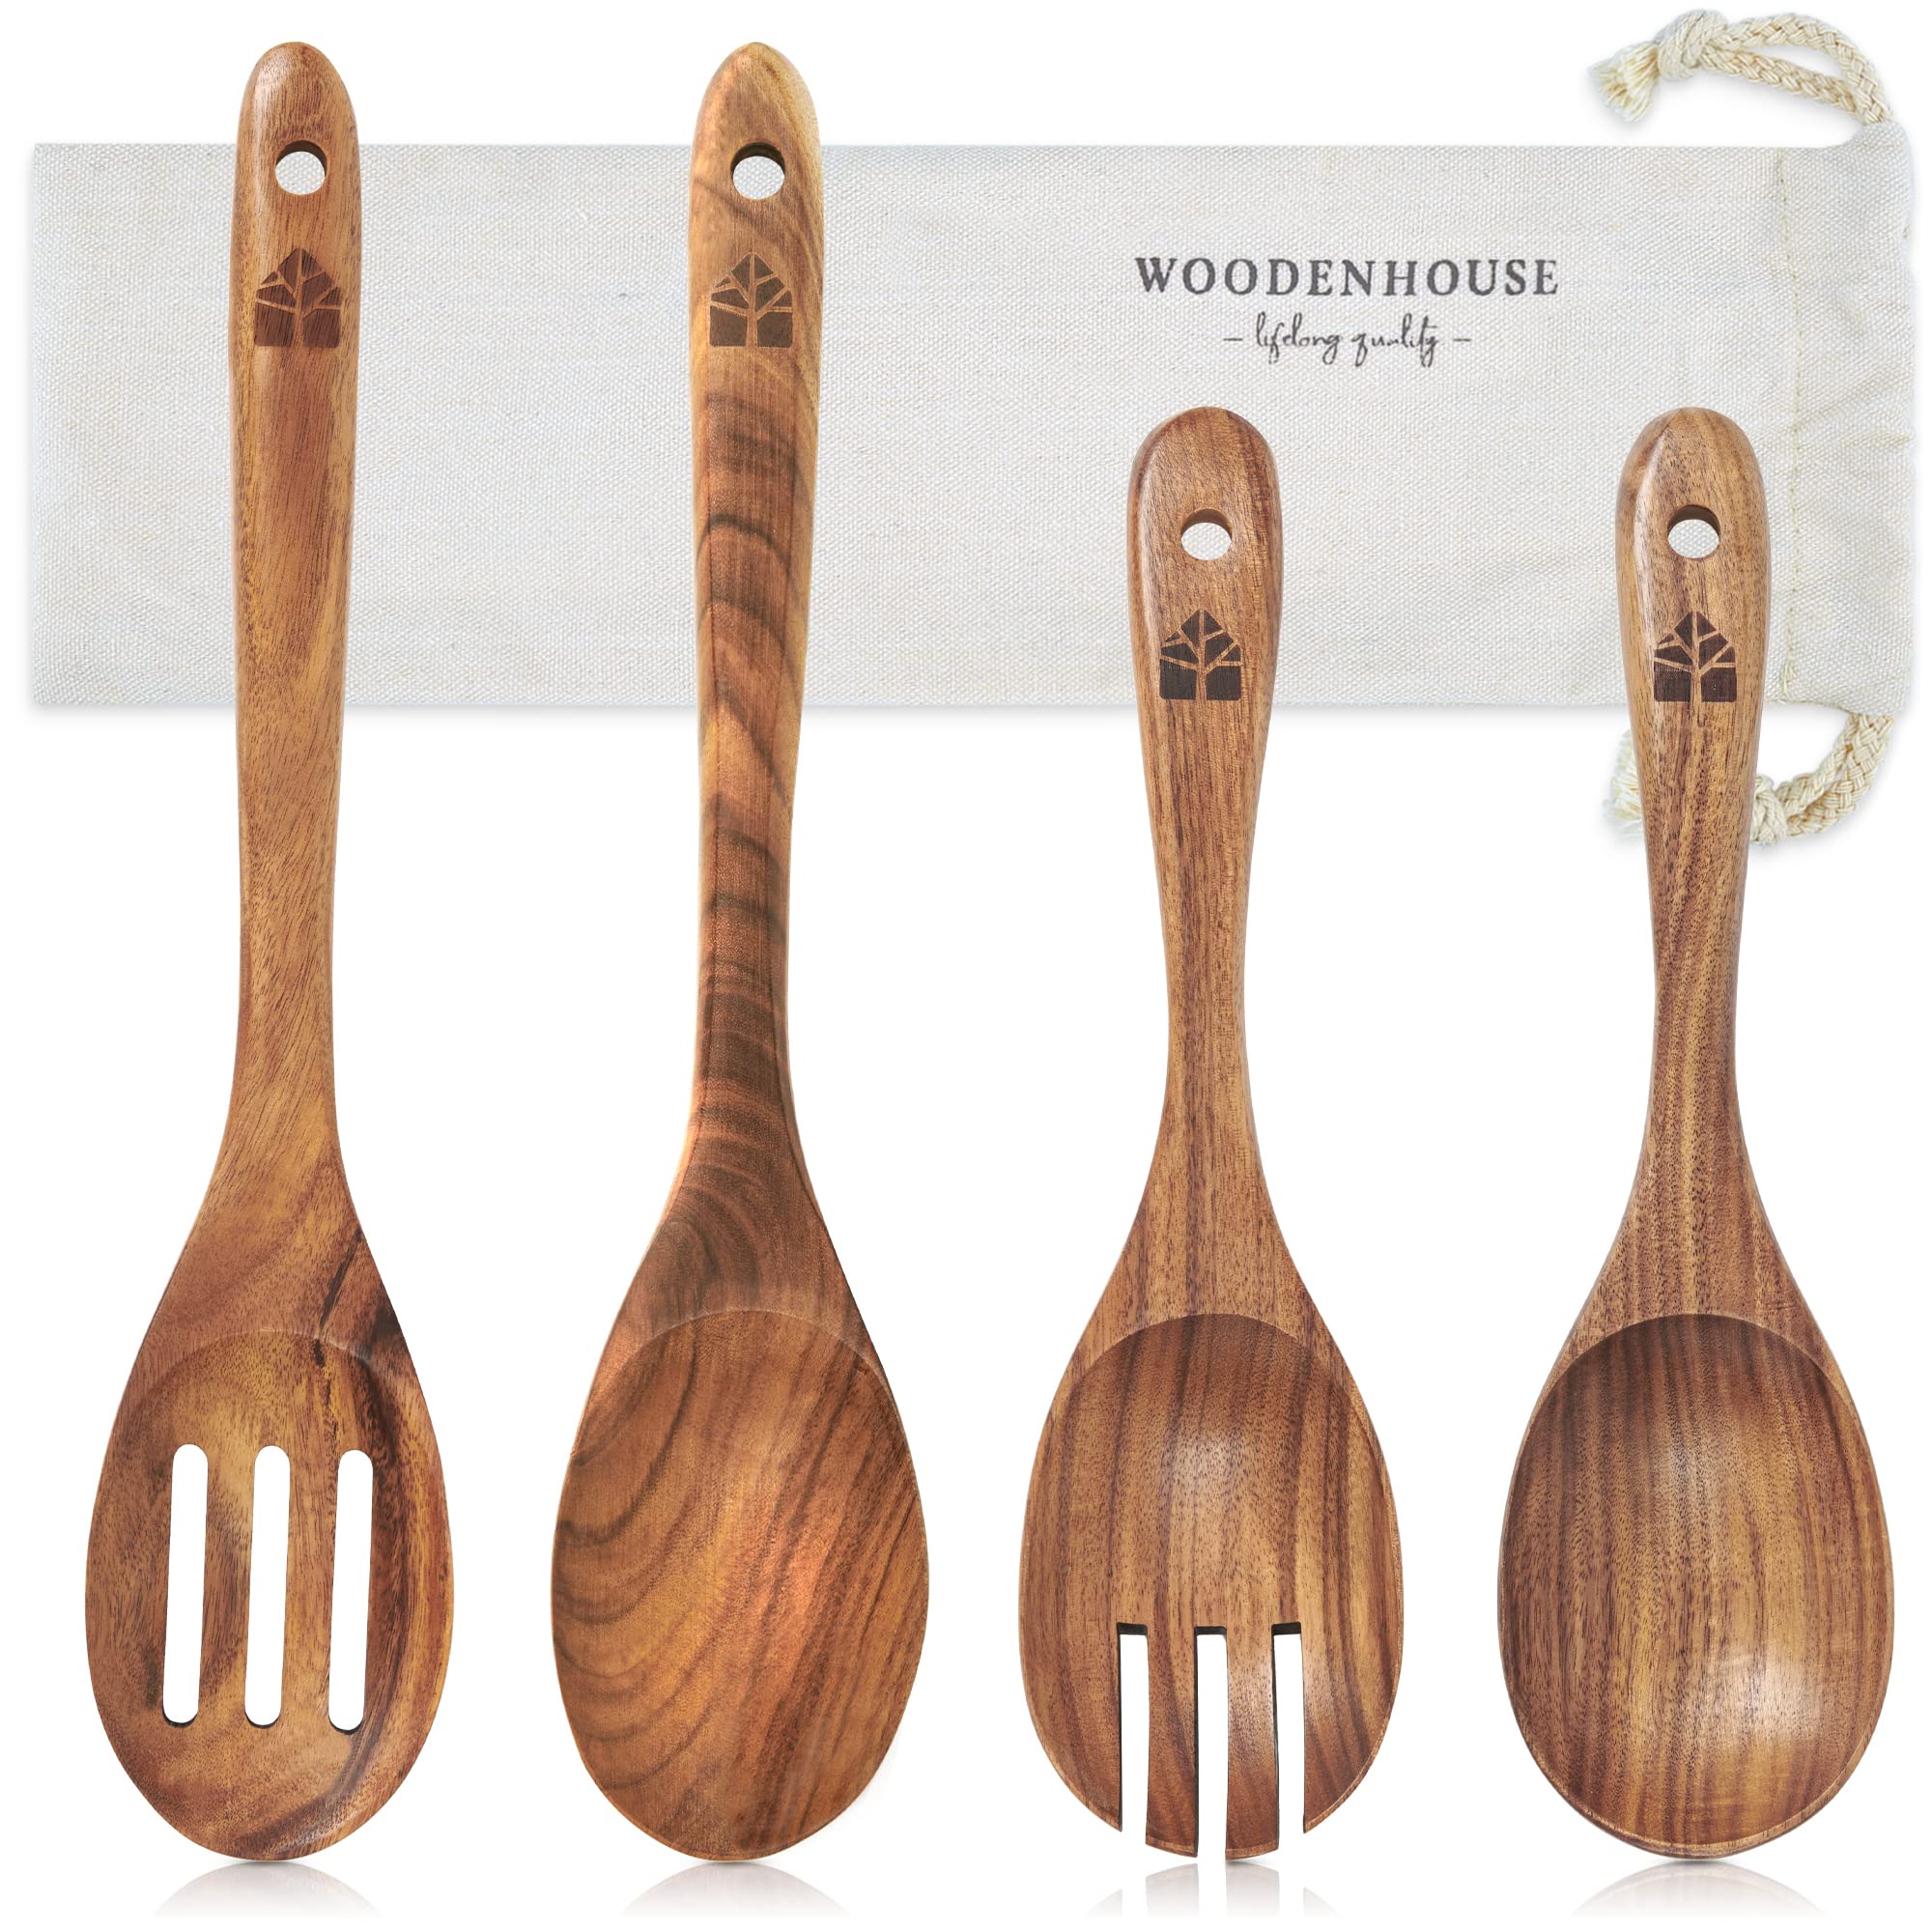 Wooden Spoons for Cooking,GUDAMAYE 10 PCE Wooden Kitchen Utensils  Set,Wooden Cooking Utensils For Non-stick Pan,Wooden Utensils for  Cooking,Wooden